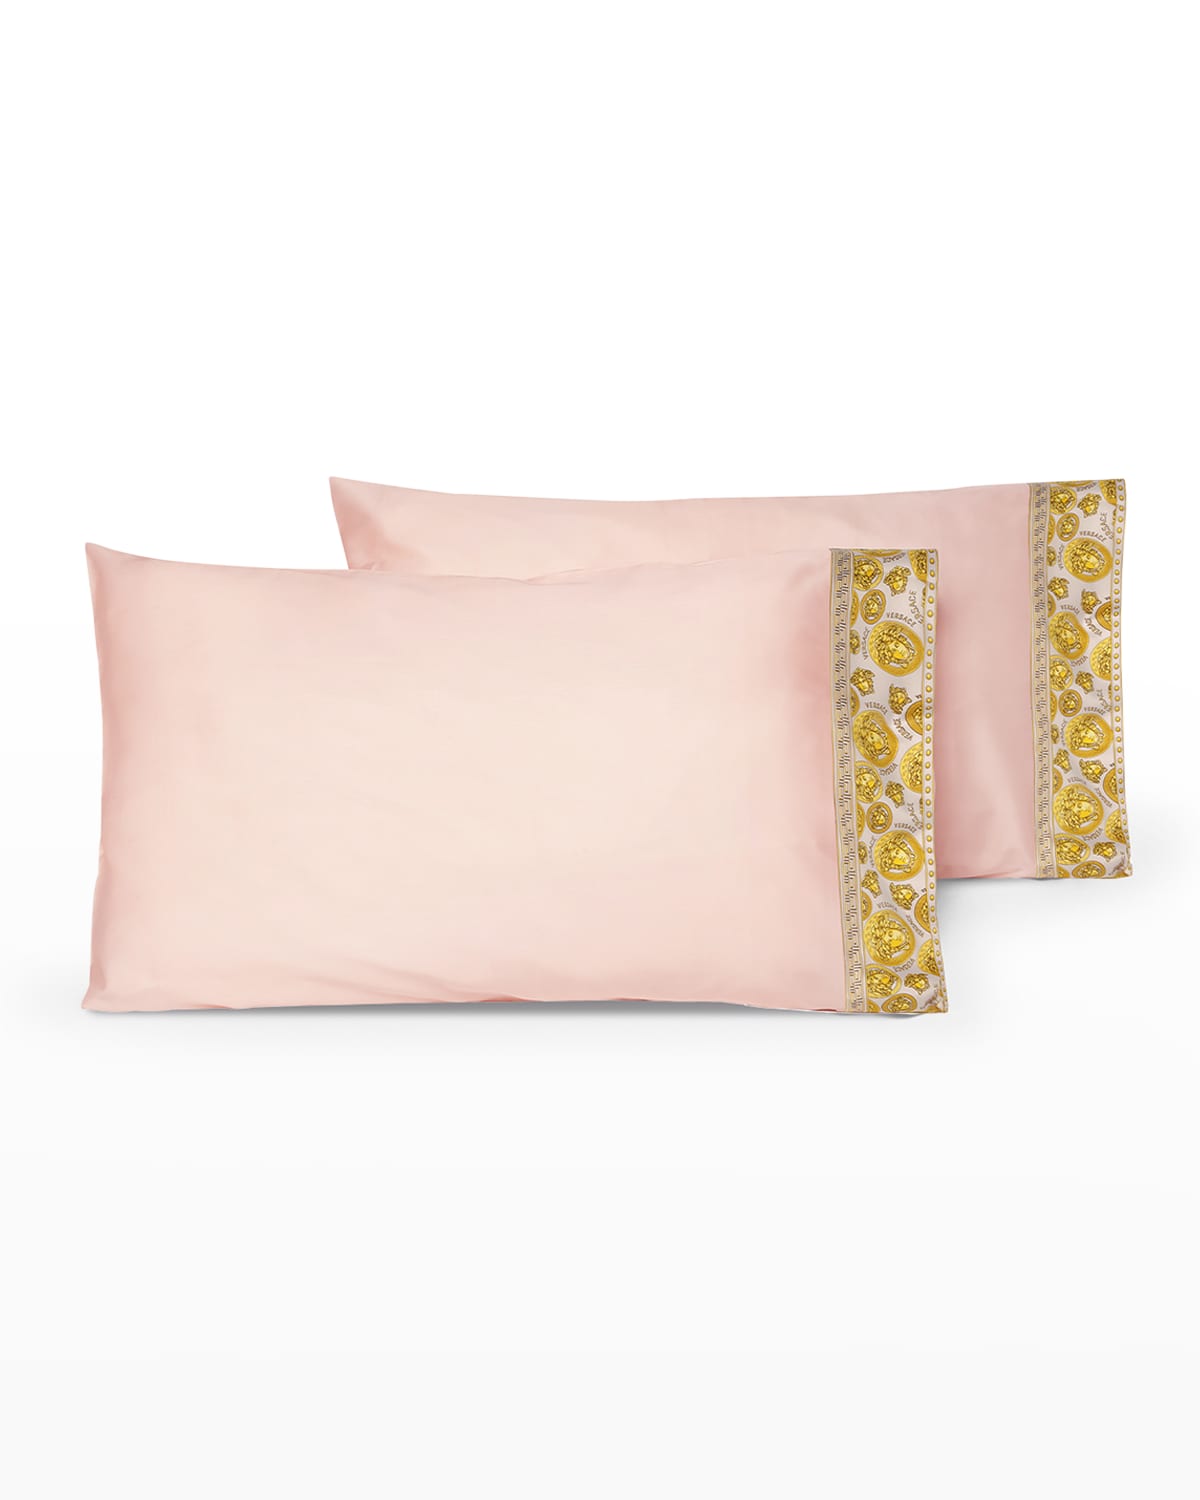 Versace Home Collection Medusa Amplified Standard Pillowcases, Set Of 2